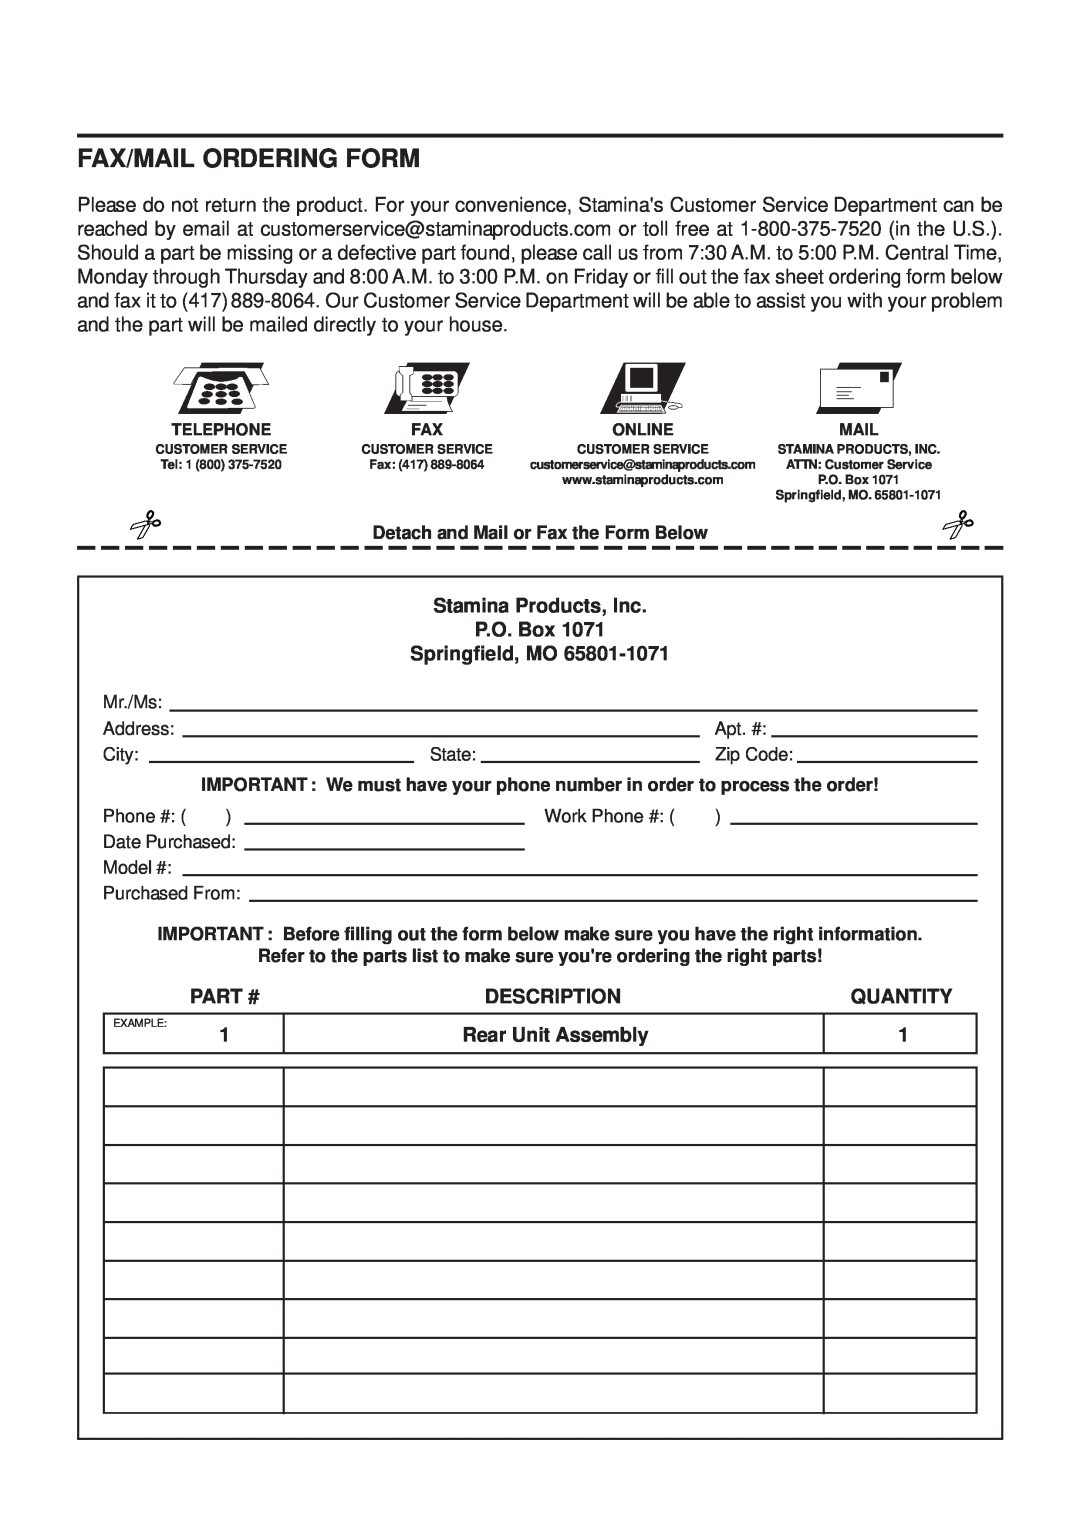 Stamina Products 15-7200 Fax/Mail Ordering Form, Stamina Products, Inc P.O. Box Springfield, MO, Rear Unit Assembly 